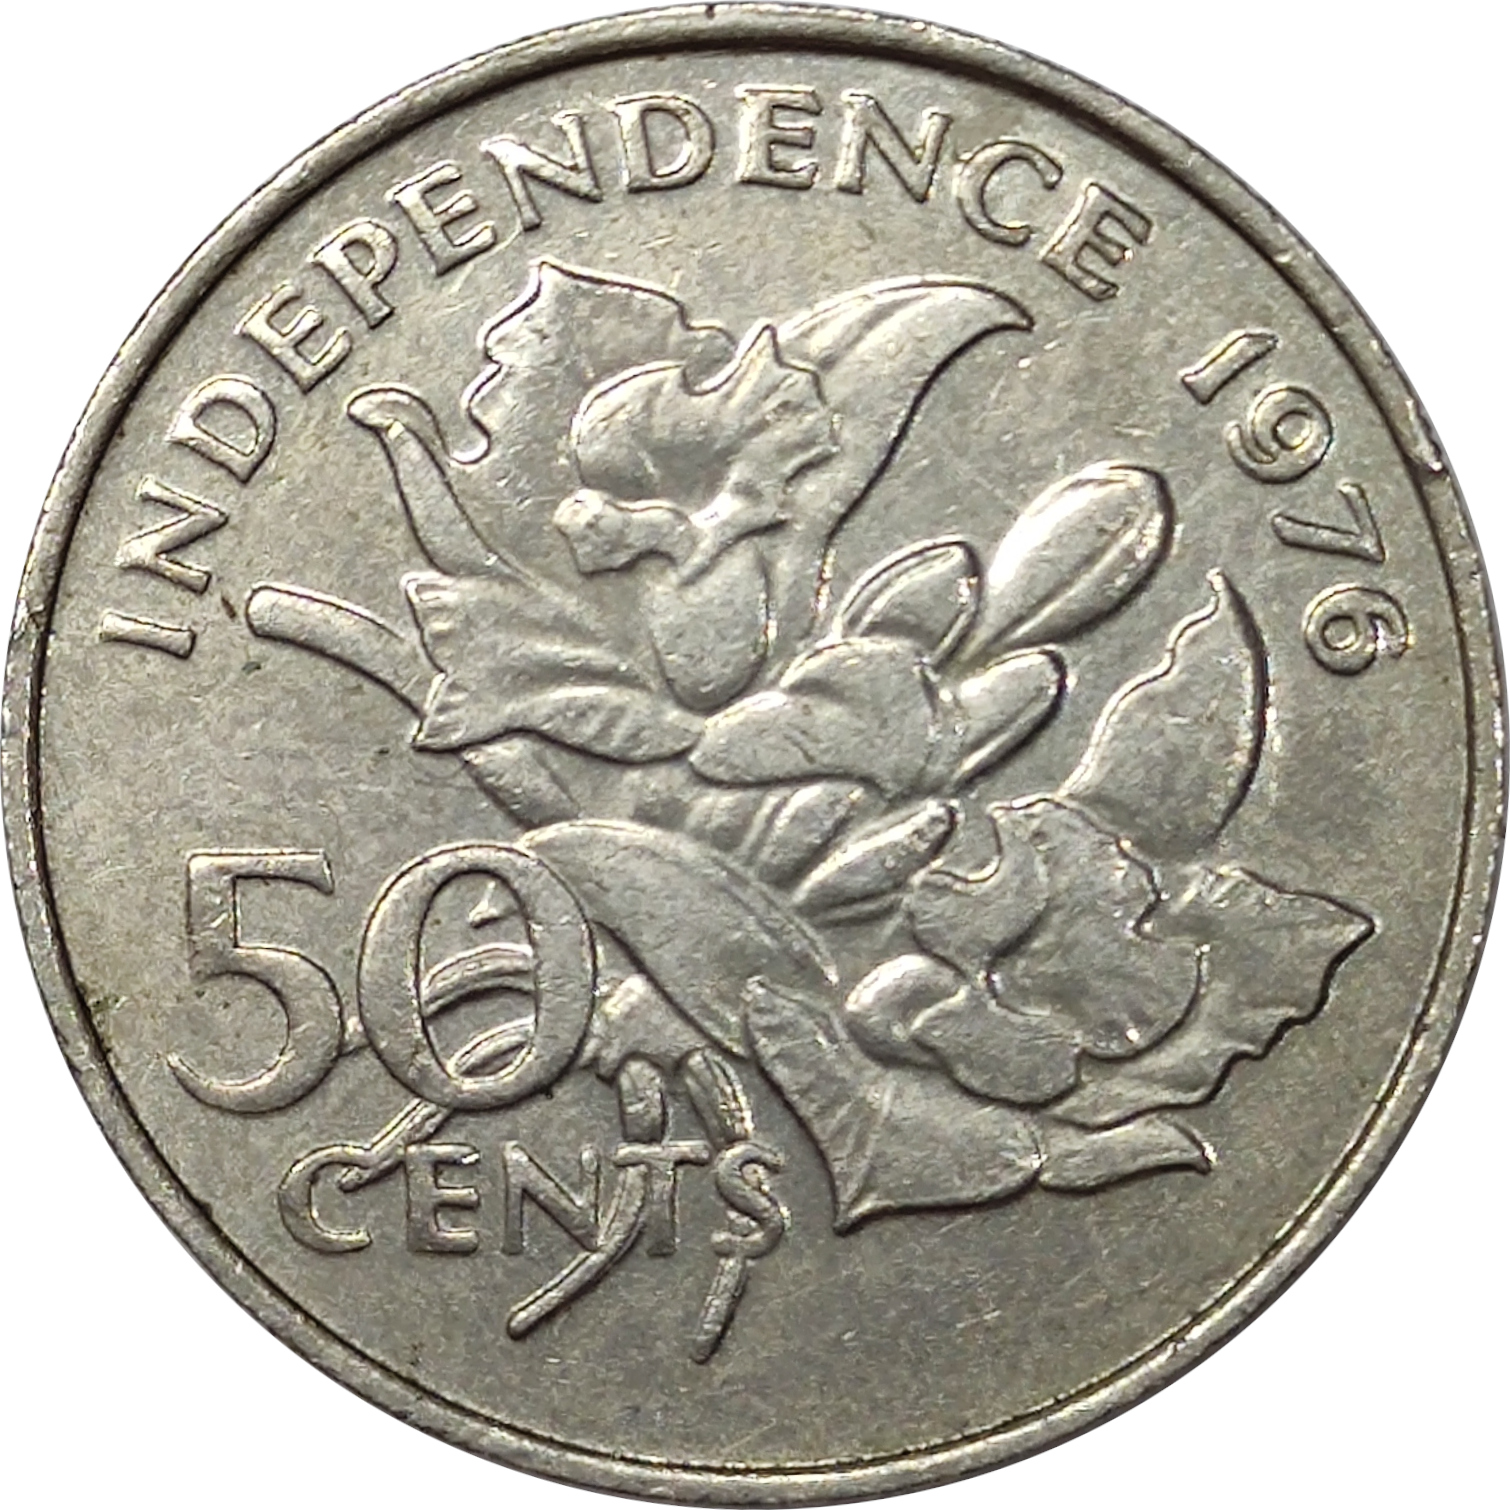 50 cents - Independence